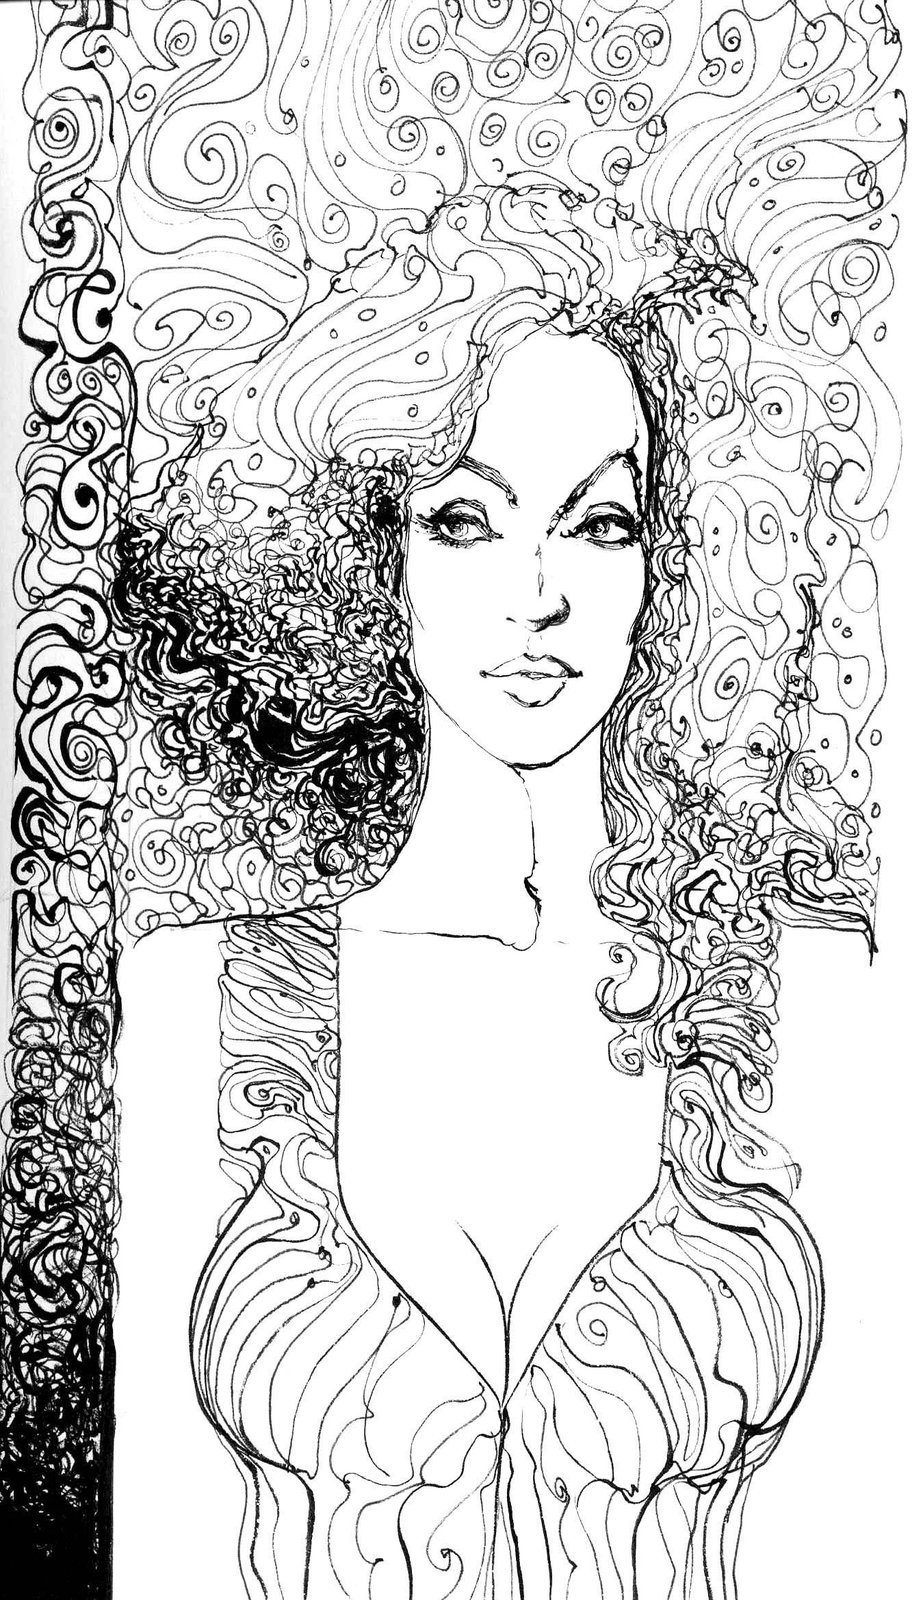 black & white ink drawing of a woman with curly hair